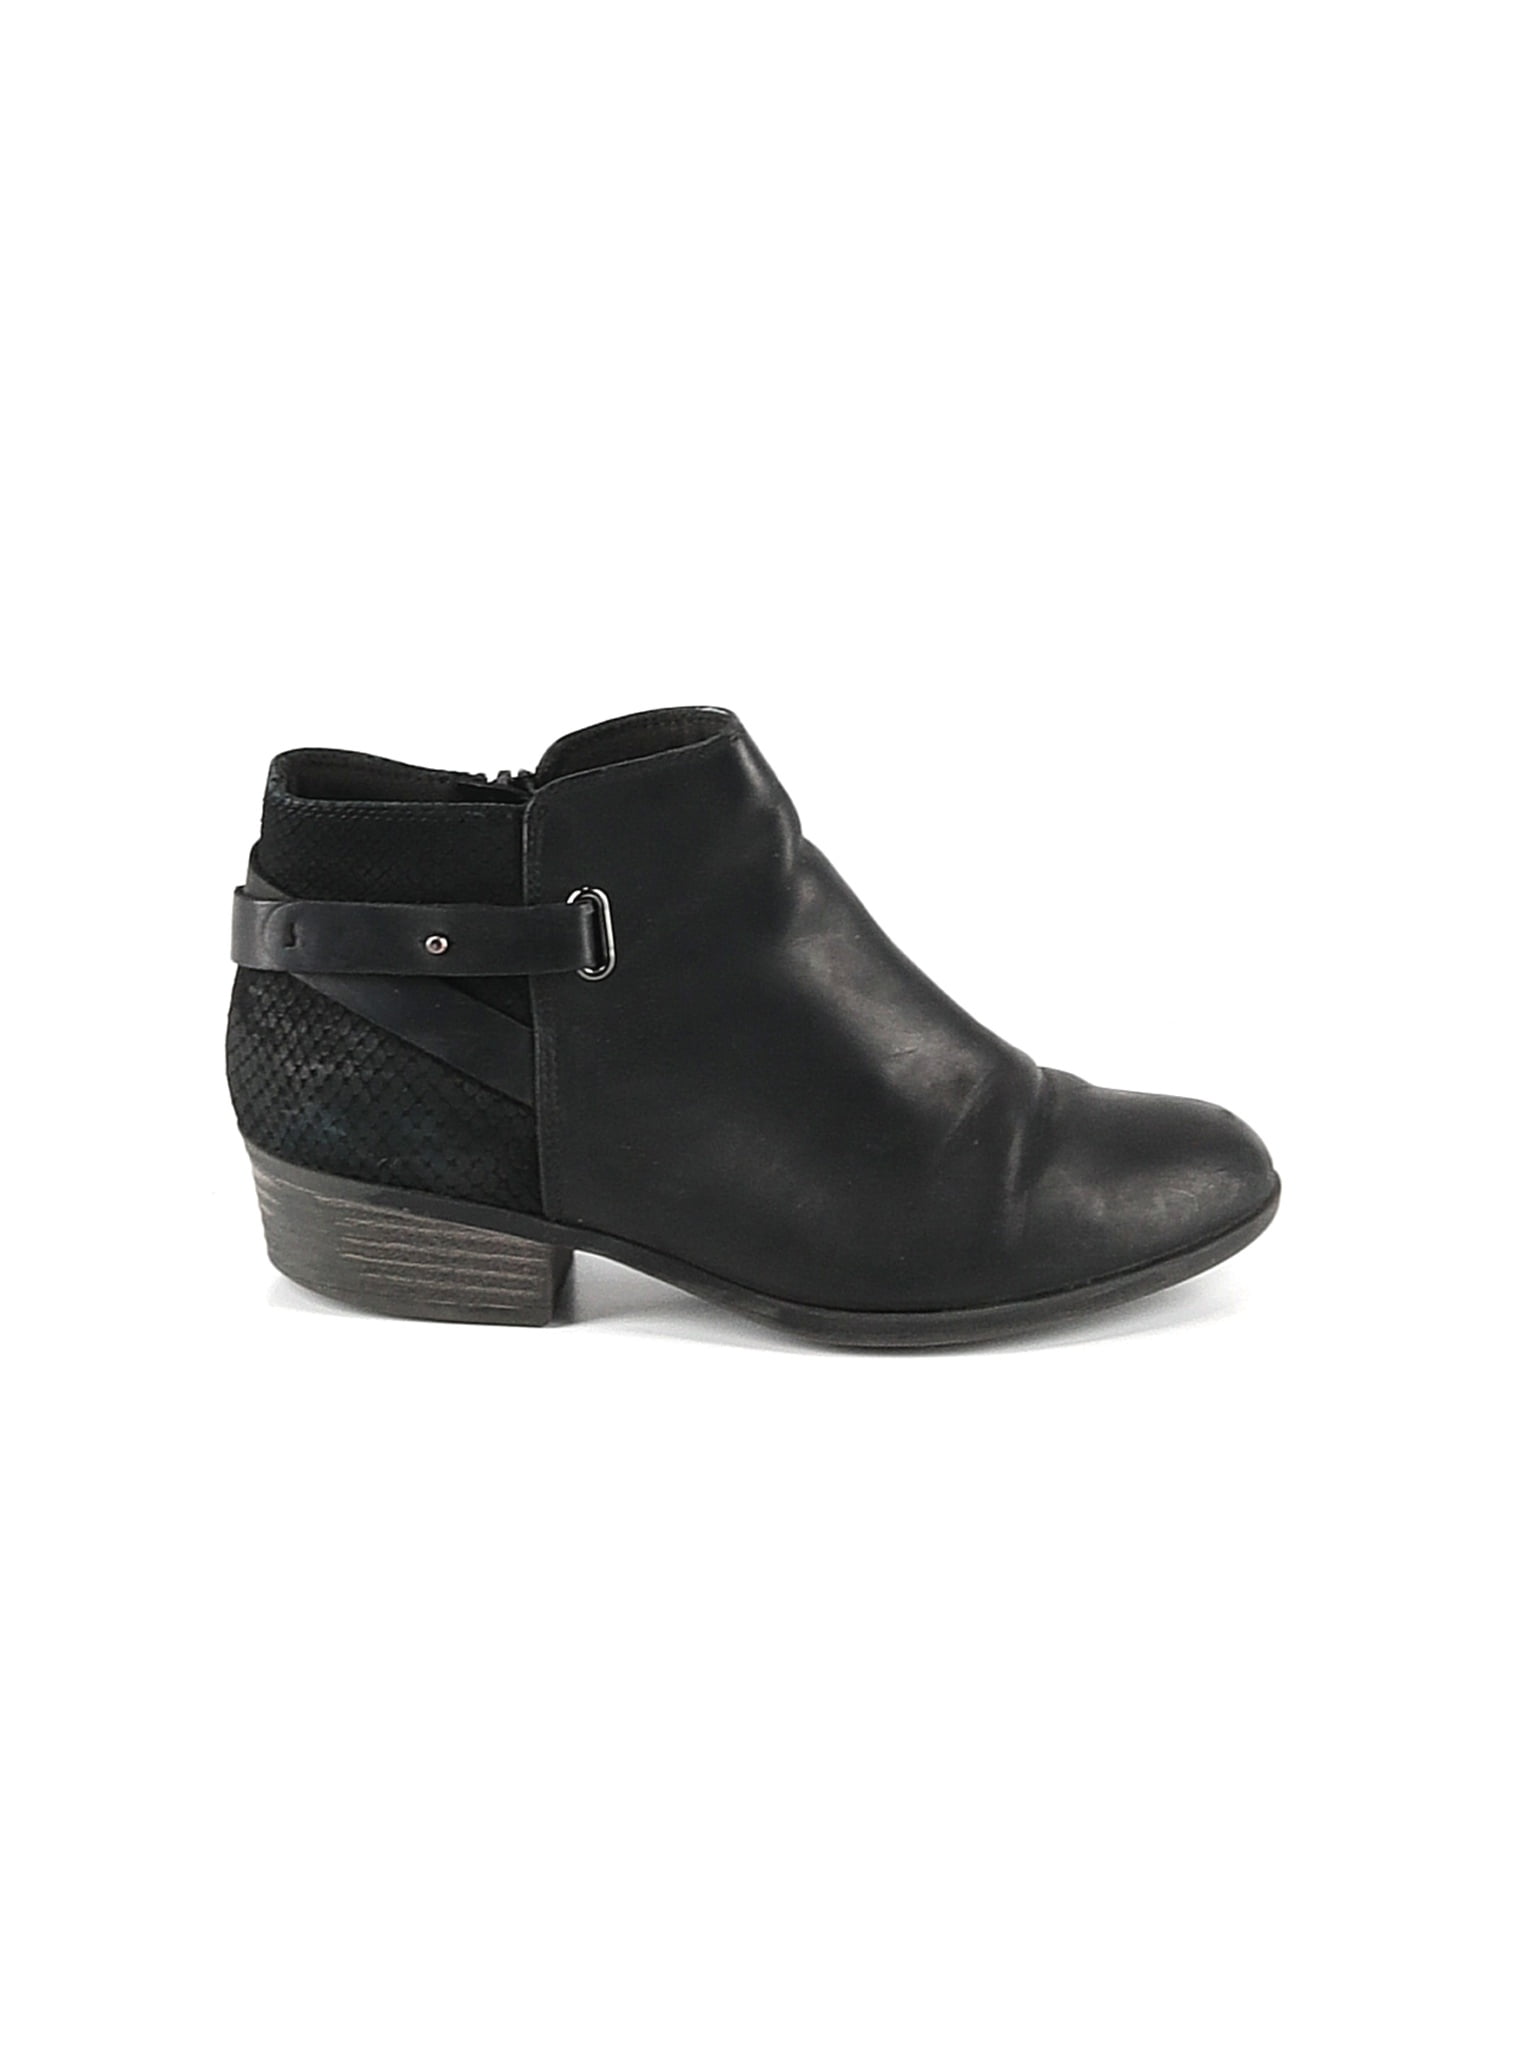 clarks boots 7